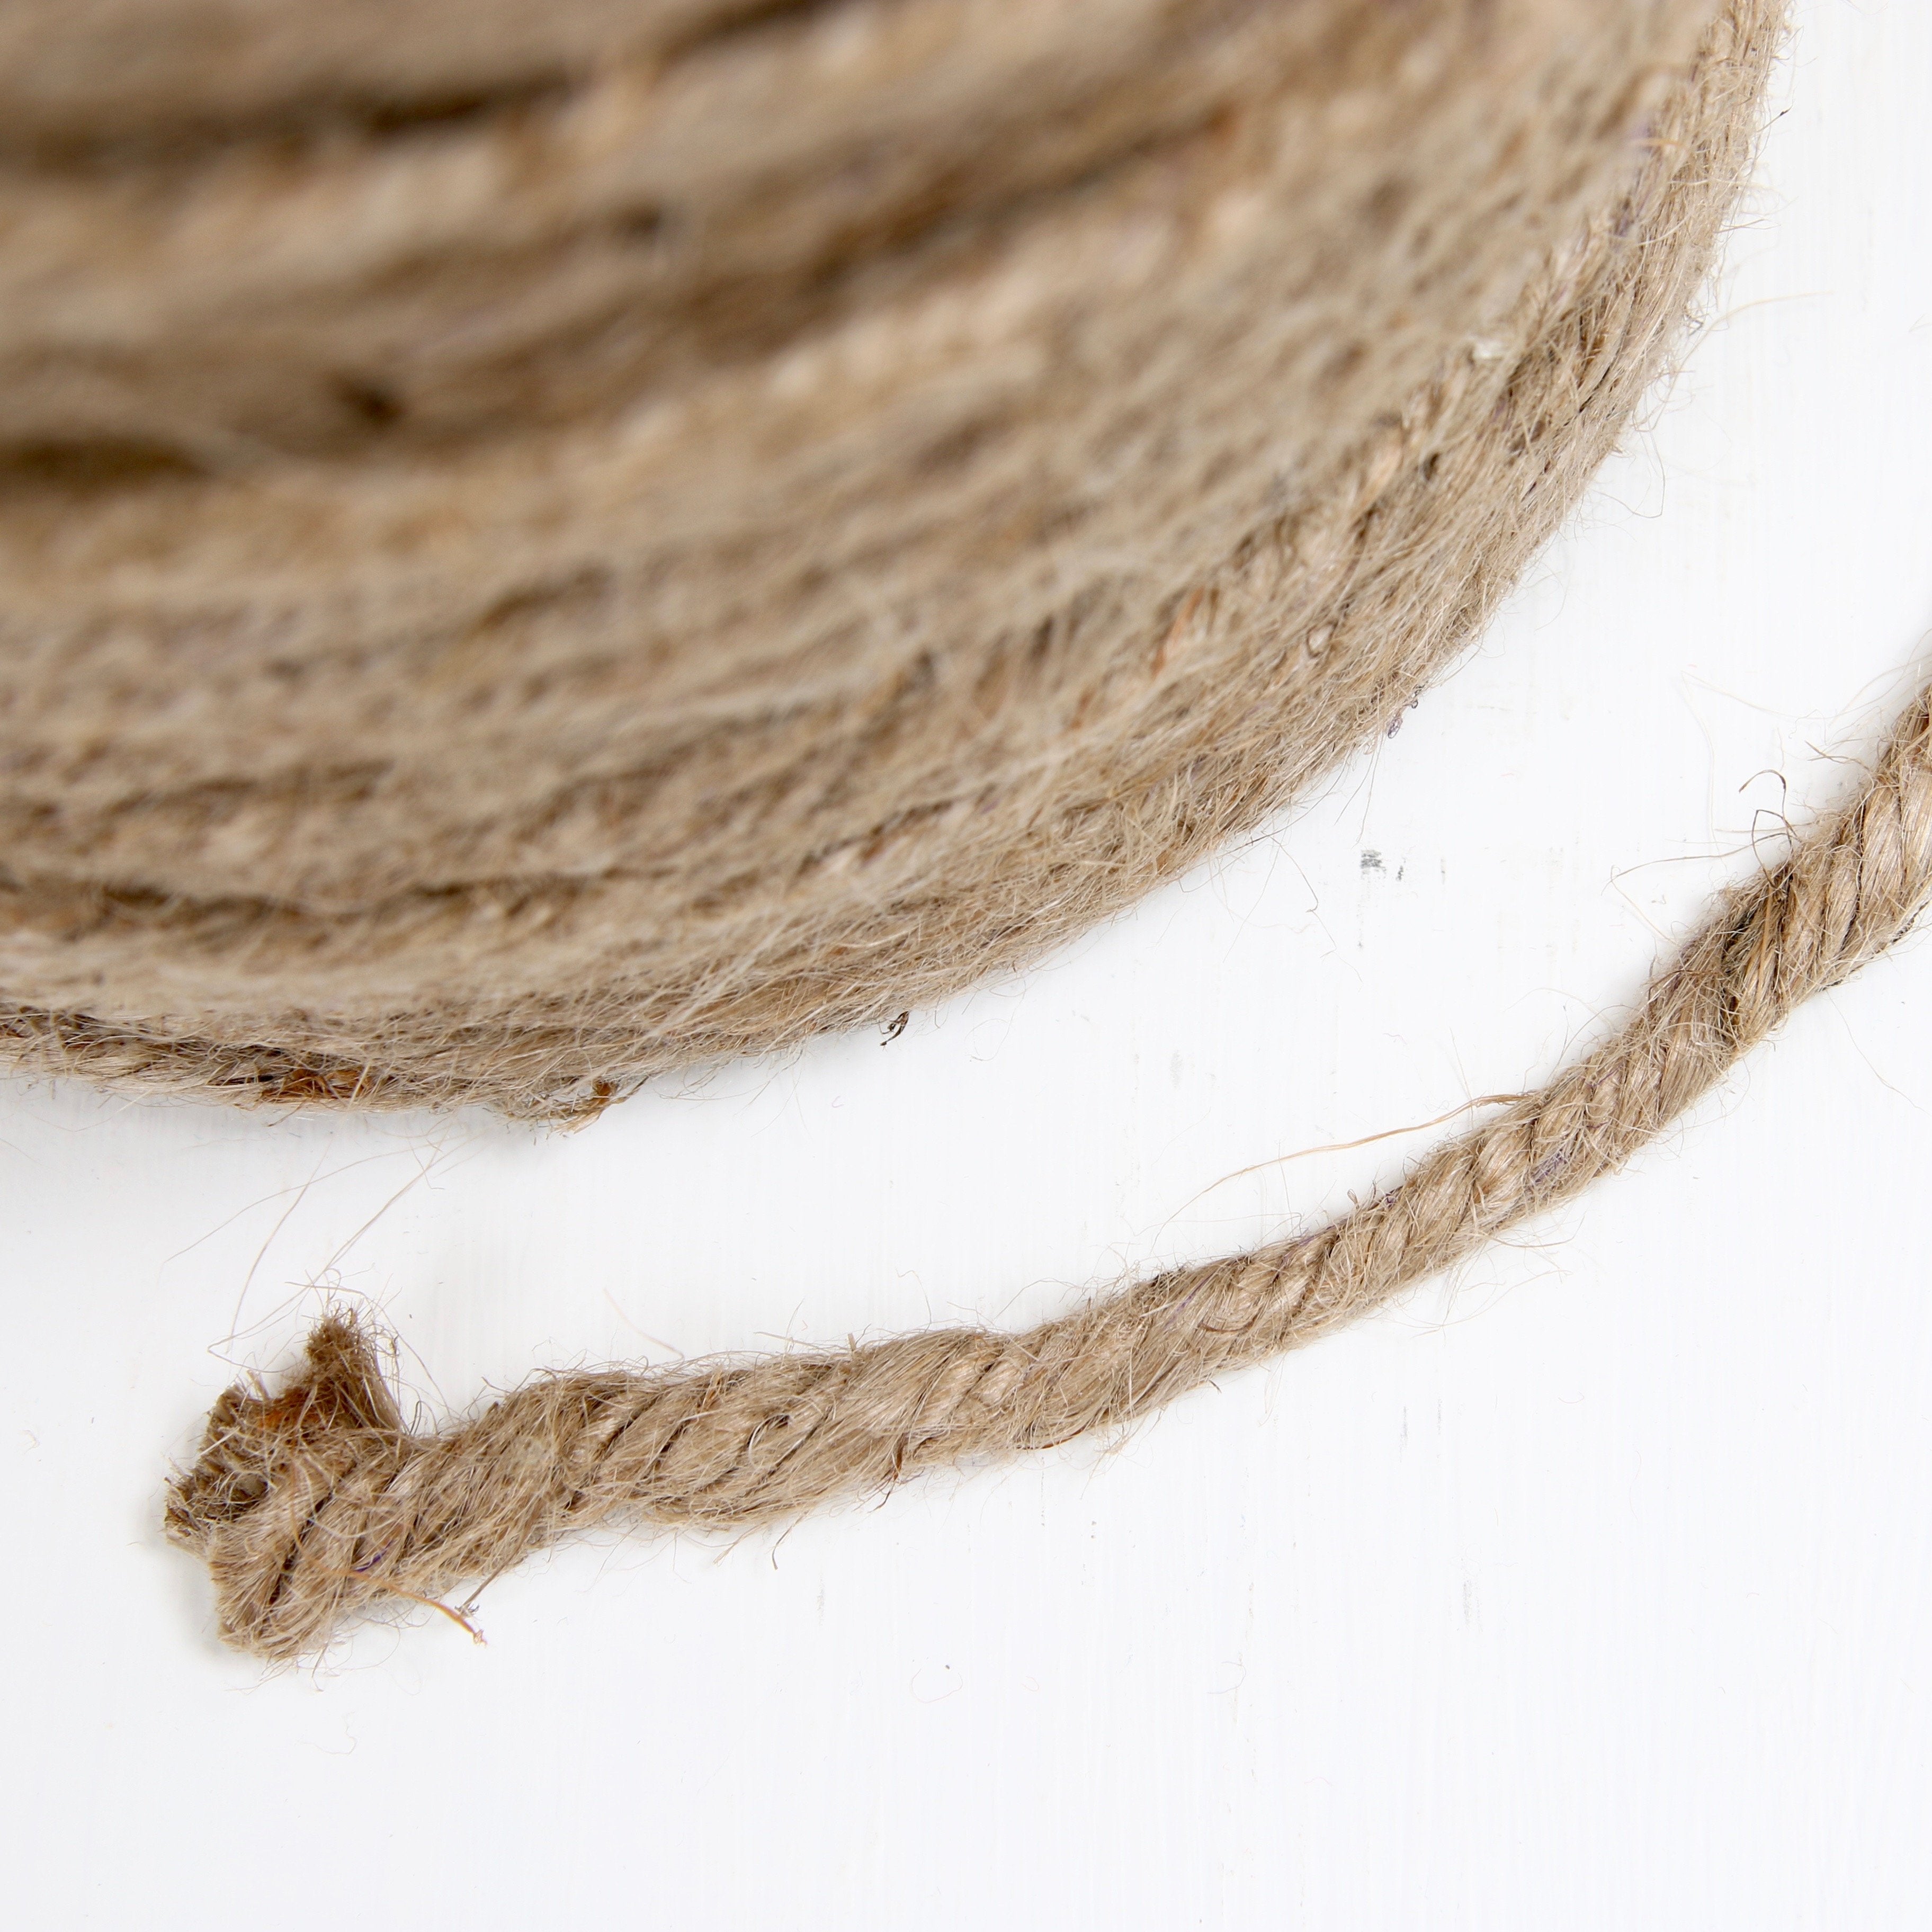 Thick Jute Rope - Search Shopping